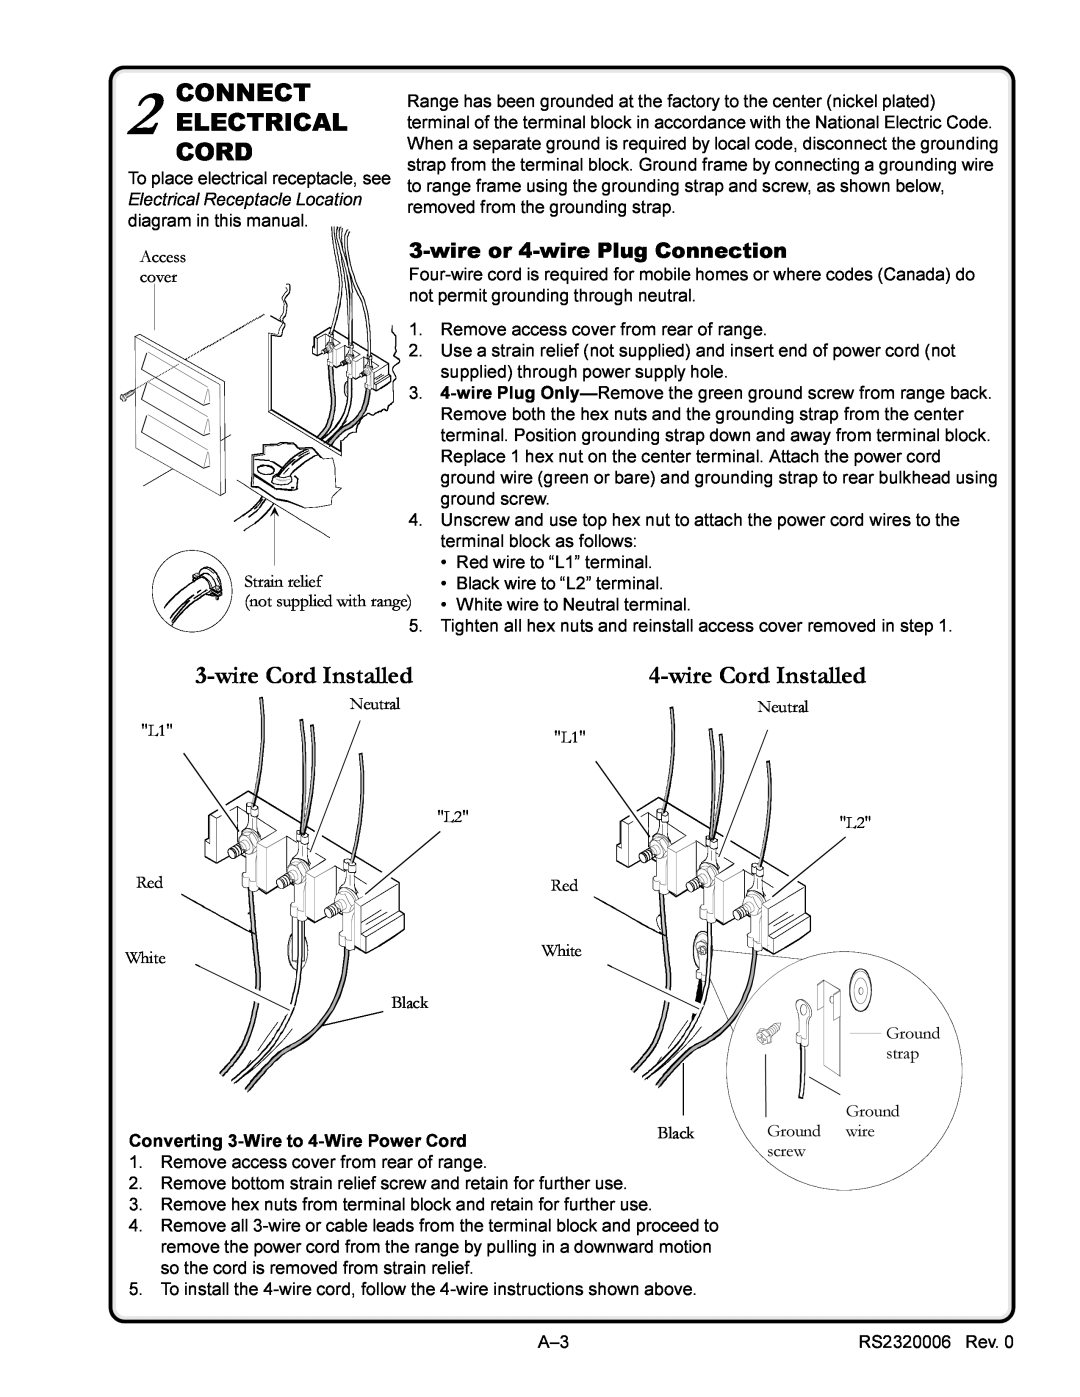 Amana RS2320006 service manual Connect Electrical Cord, Zluh&Rug,Qvwdoohgzluh&Rug,Qvwdoohg, wire or 4-wire Plug Connection 